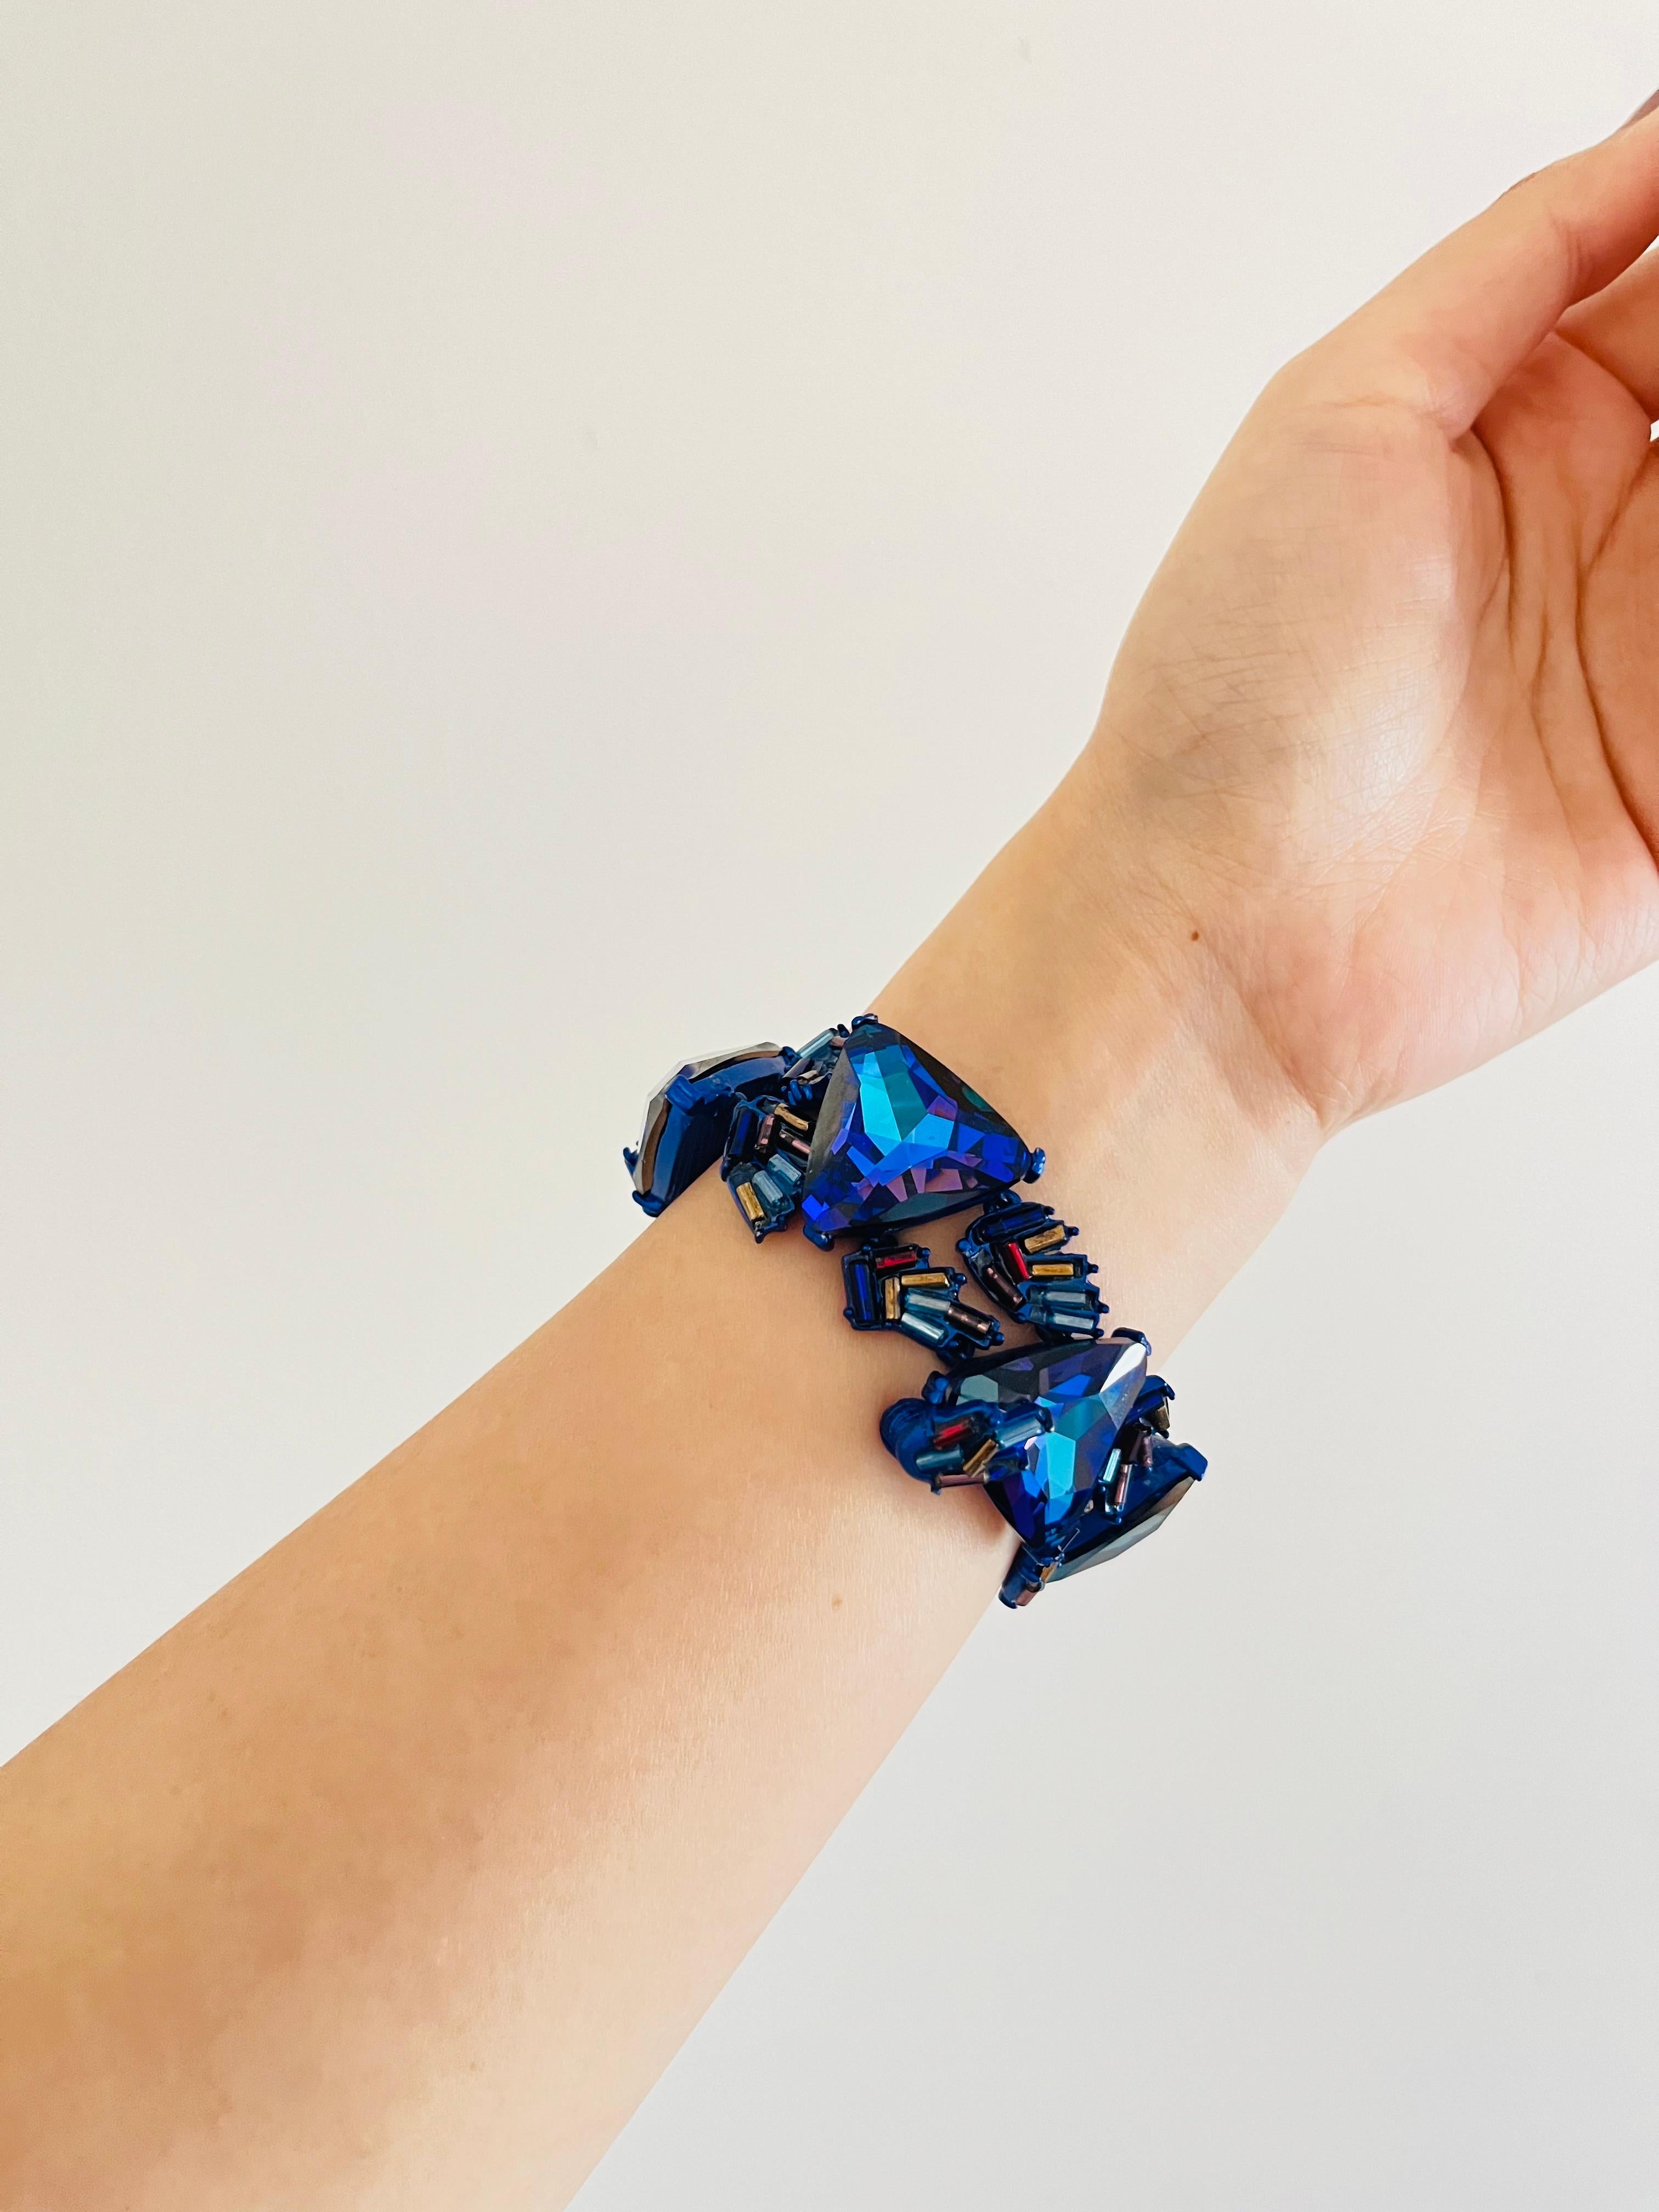 Christian Lacroix Vintage 1980s Crystals Navy Purple Iridescent Bangle Bracelet In Excellent Condition For Sale In Wokingham, England